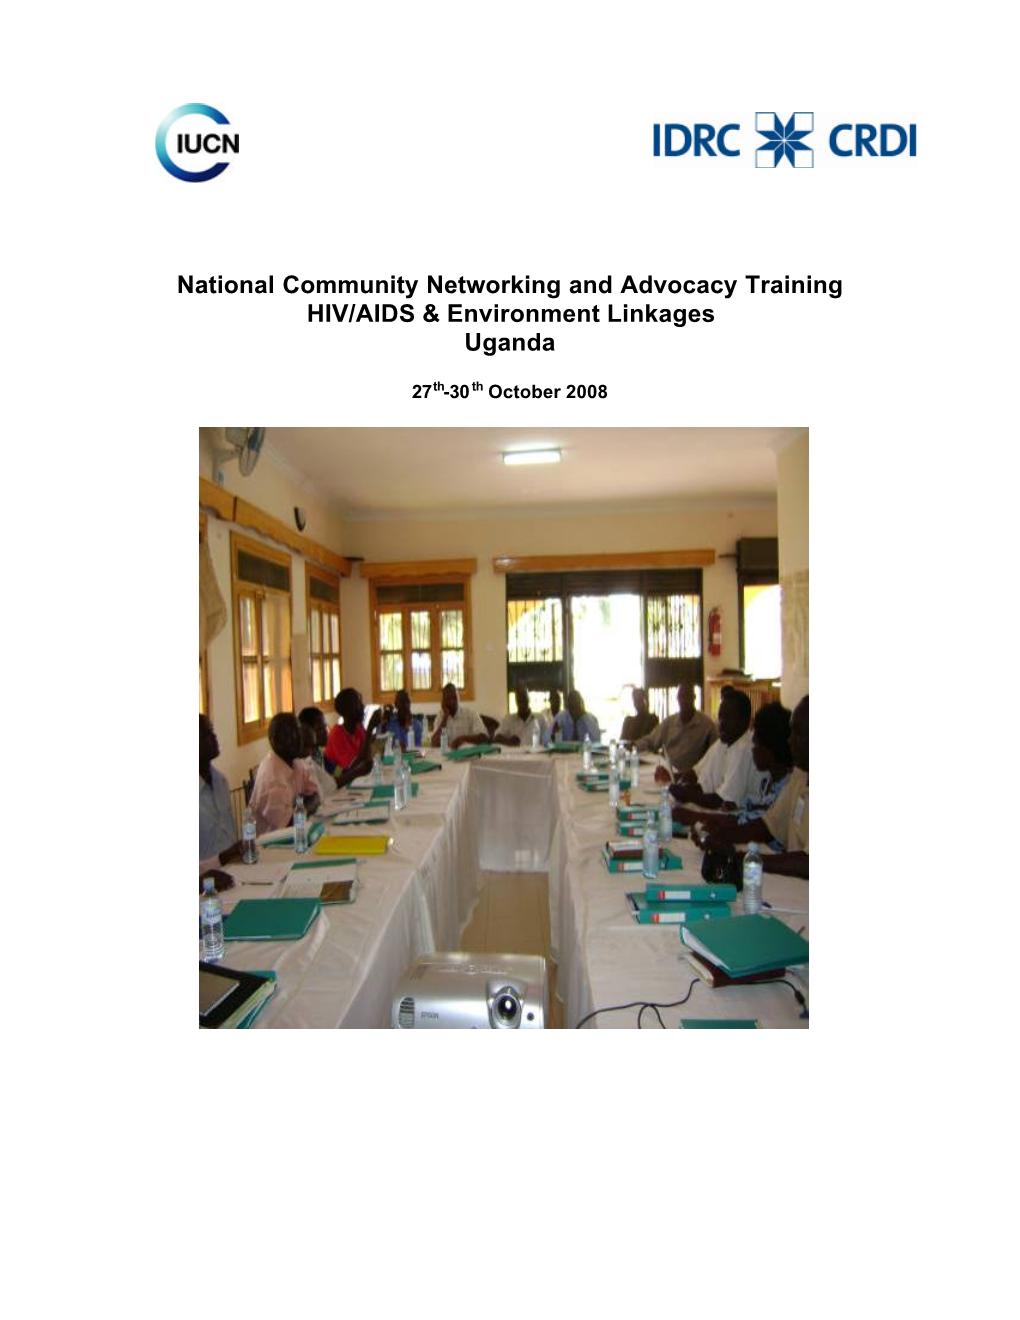 National Community Networking and Advocacy Training HIV/AIDS & Environment Linkages Uganda